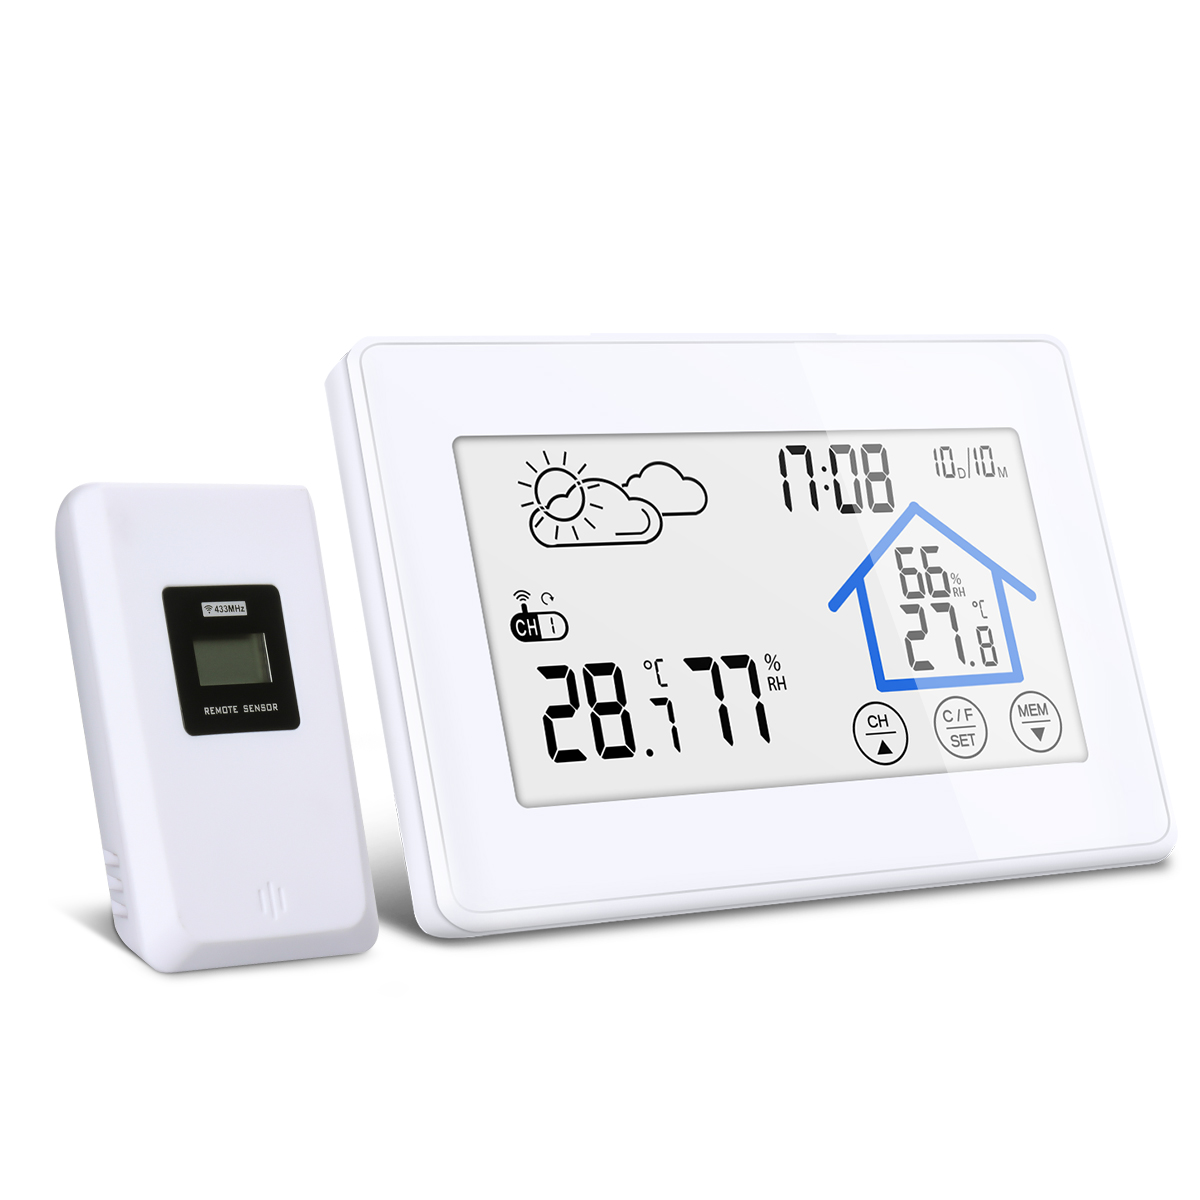 

Wireless Weather Station Indoor Outdoor Thermometer Digital Hygrometer Temperature and Humidity Monitor Timer Date Backl